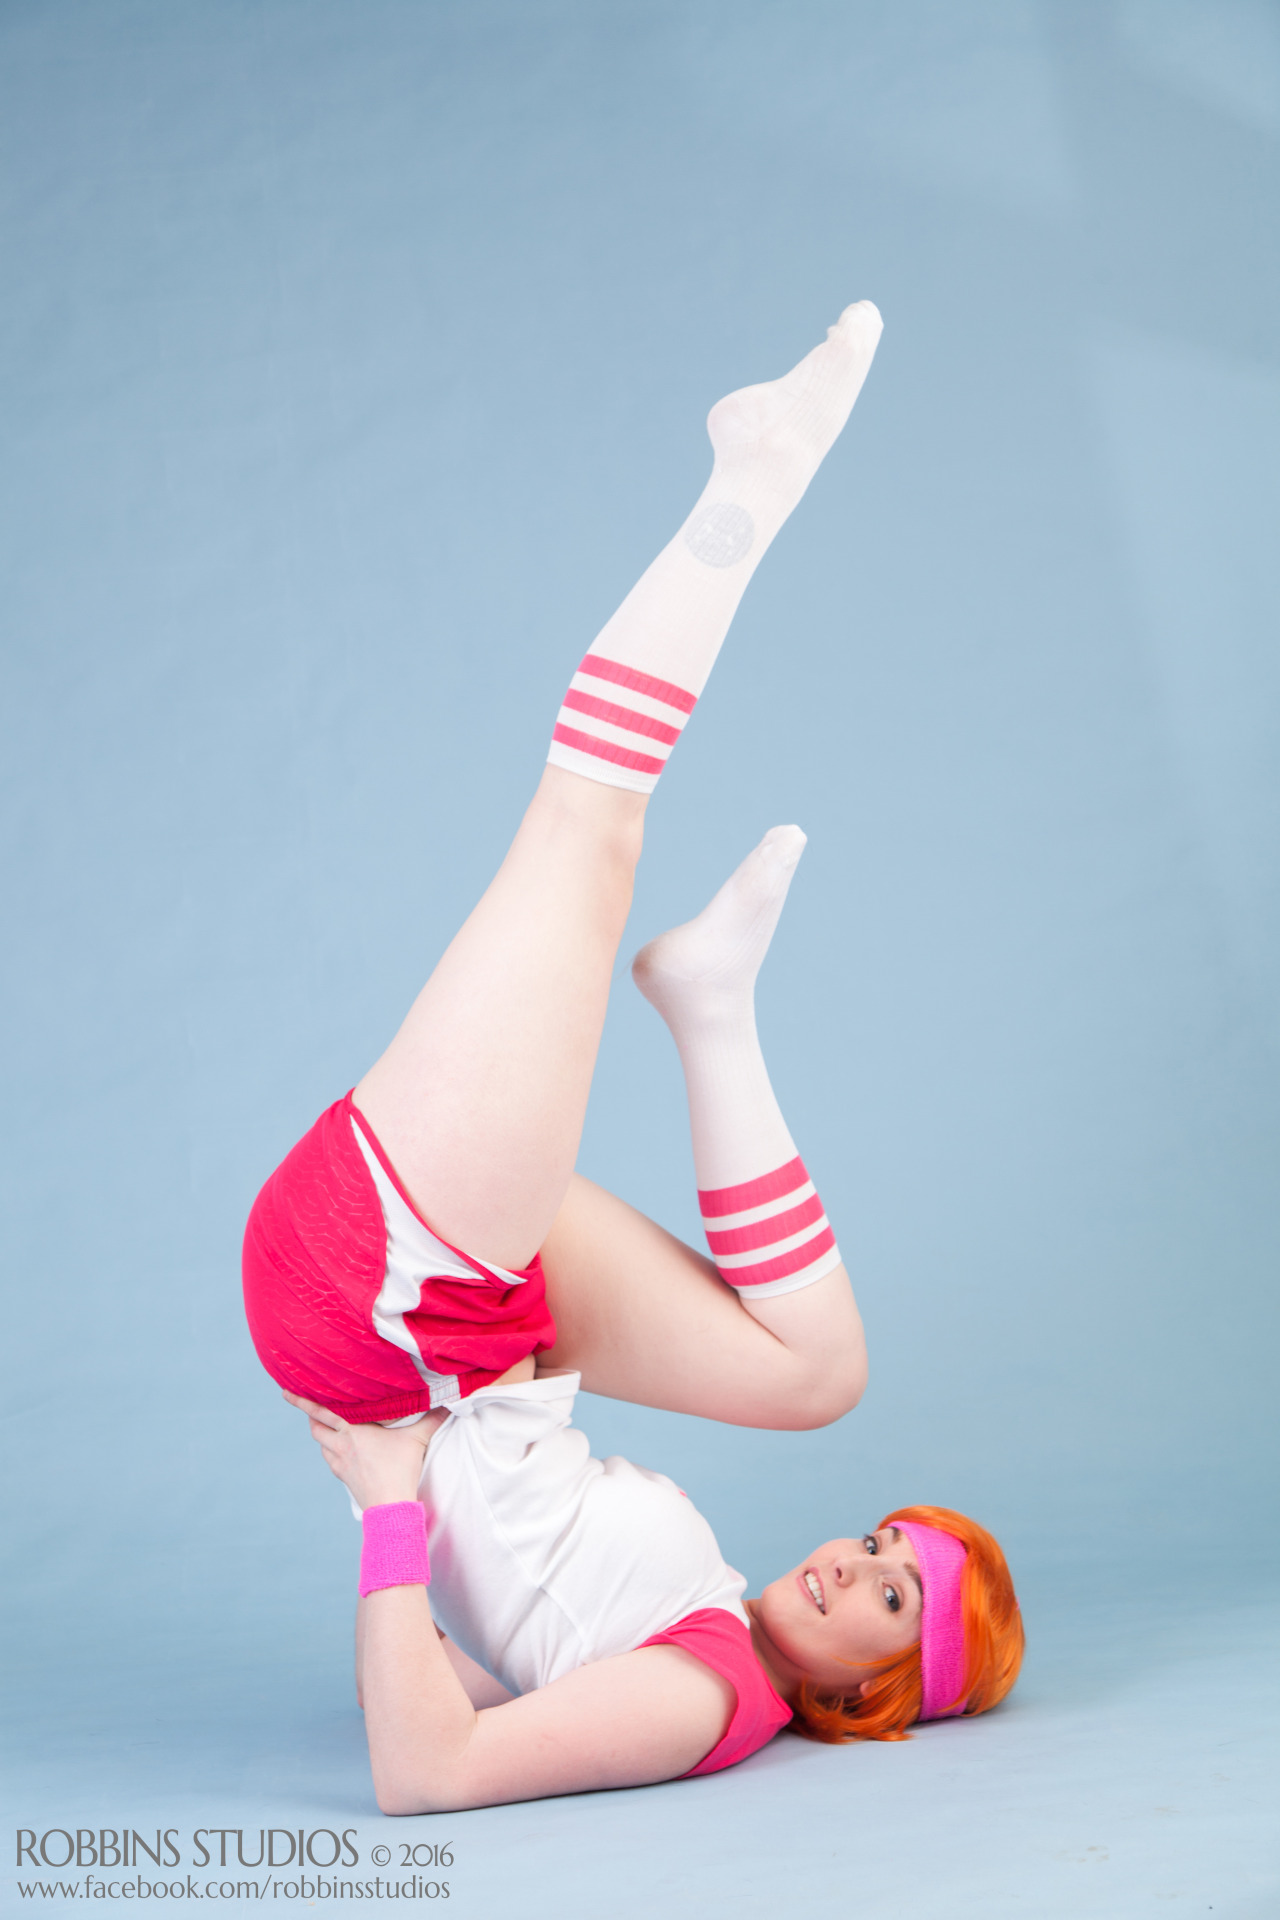 my exercise Nora cosplay, it’s comfortable and hilarious &lt;3 oh hey, that’s